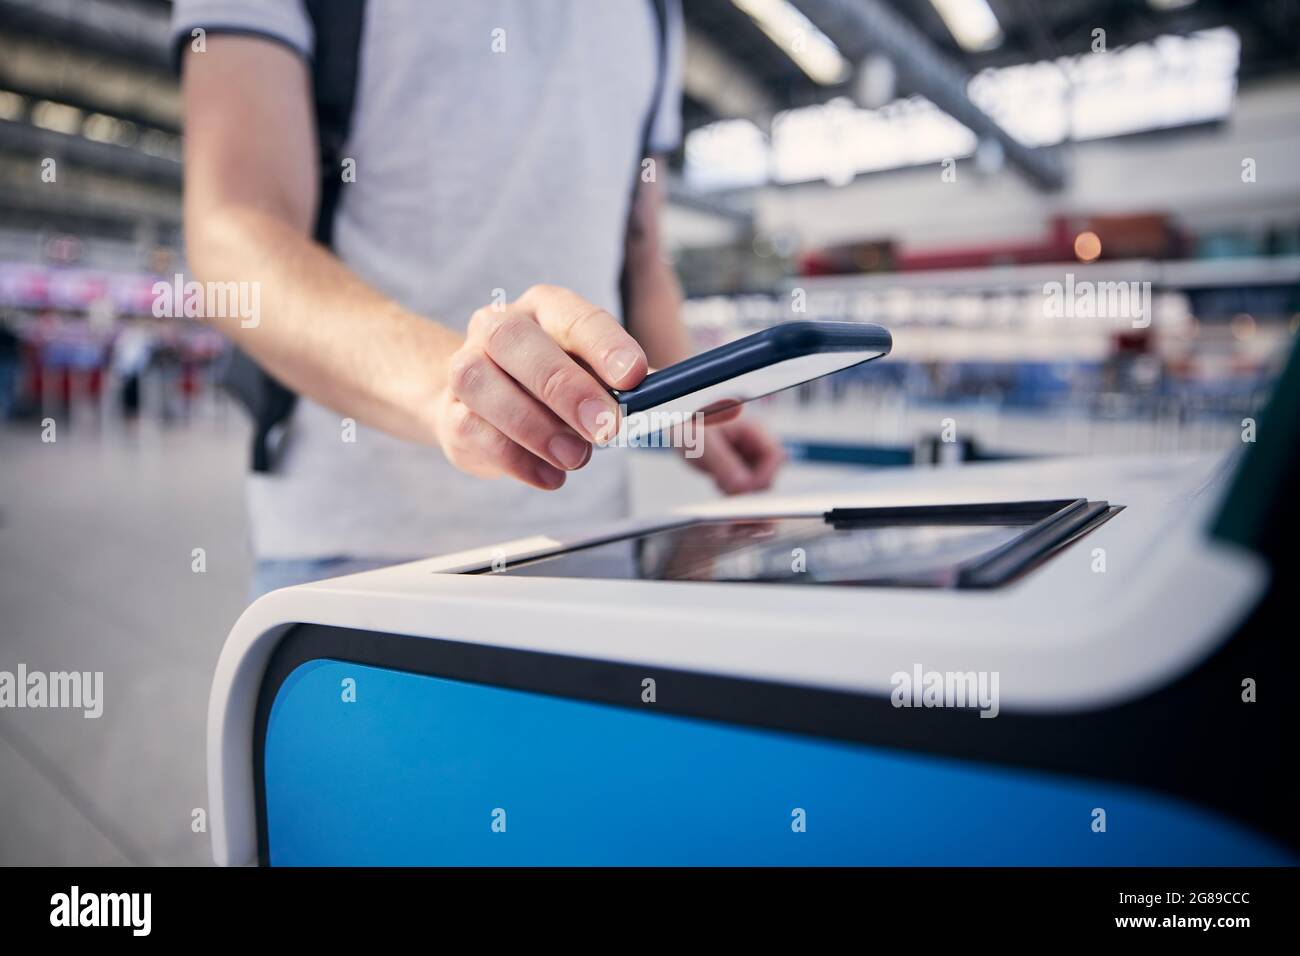 Hand of man during  using self service check-in machine. Passenger scanning ticket on smart phone at airport terminal. Stock Photo